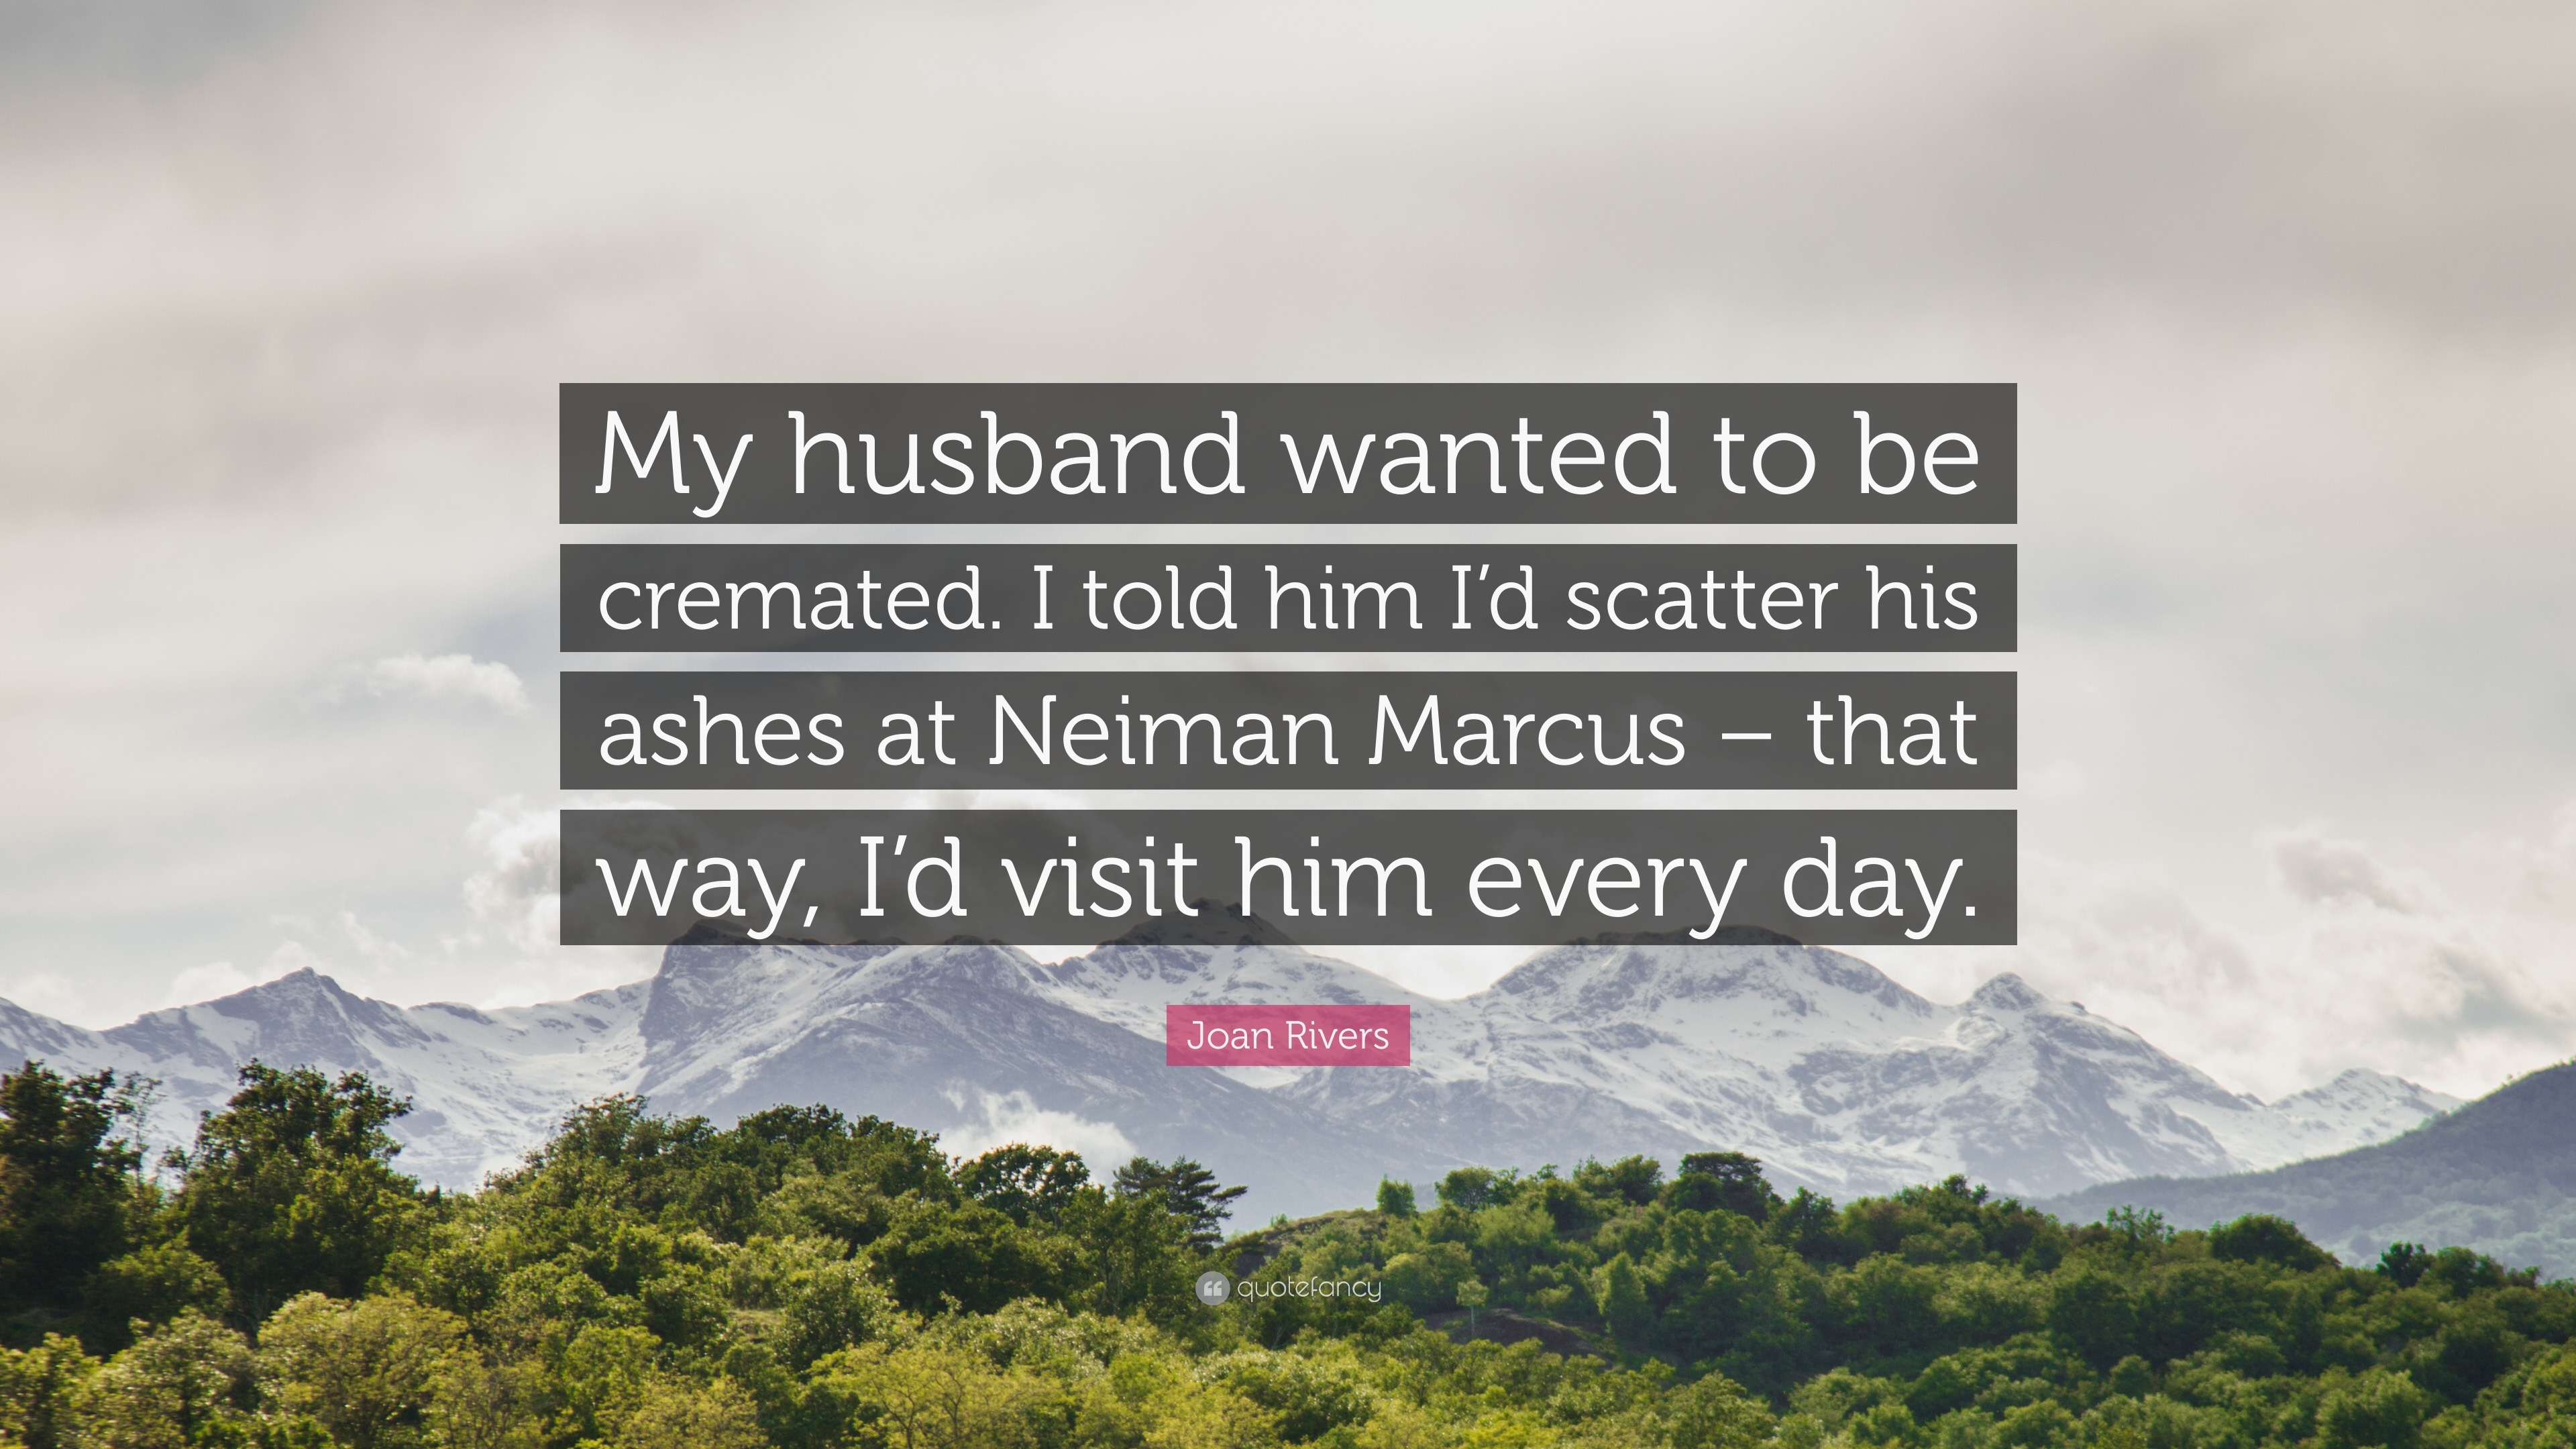 Joan Rivers Quote: “My husband wanted to be cremated. I told him I